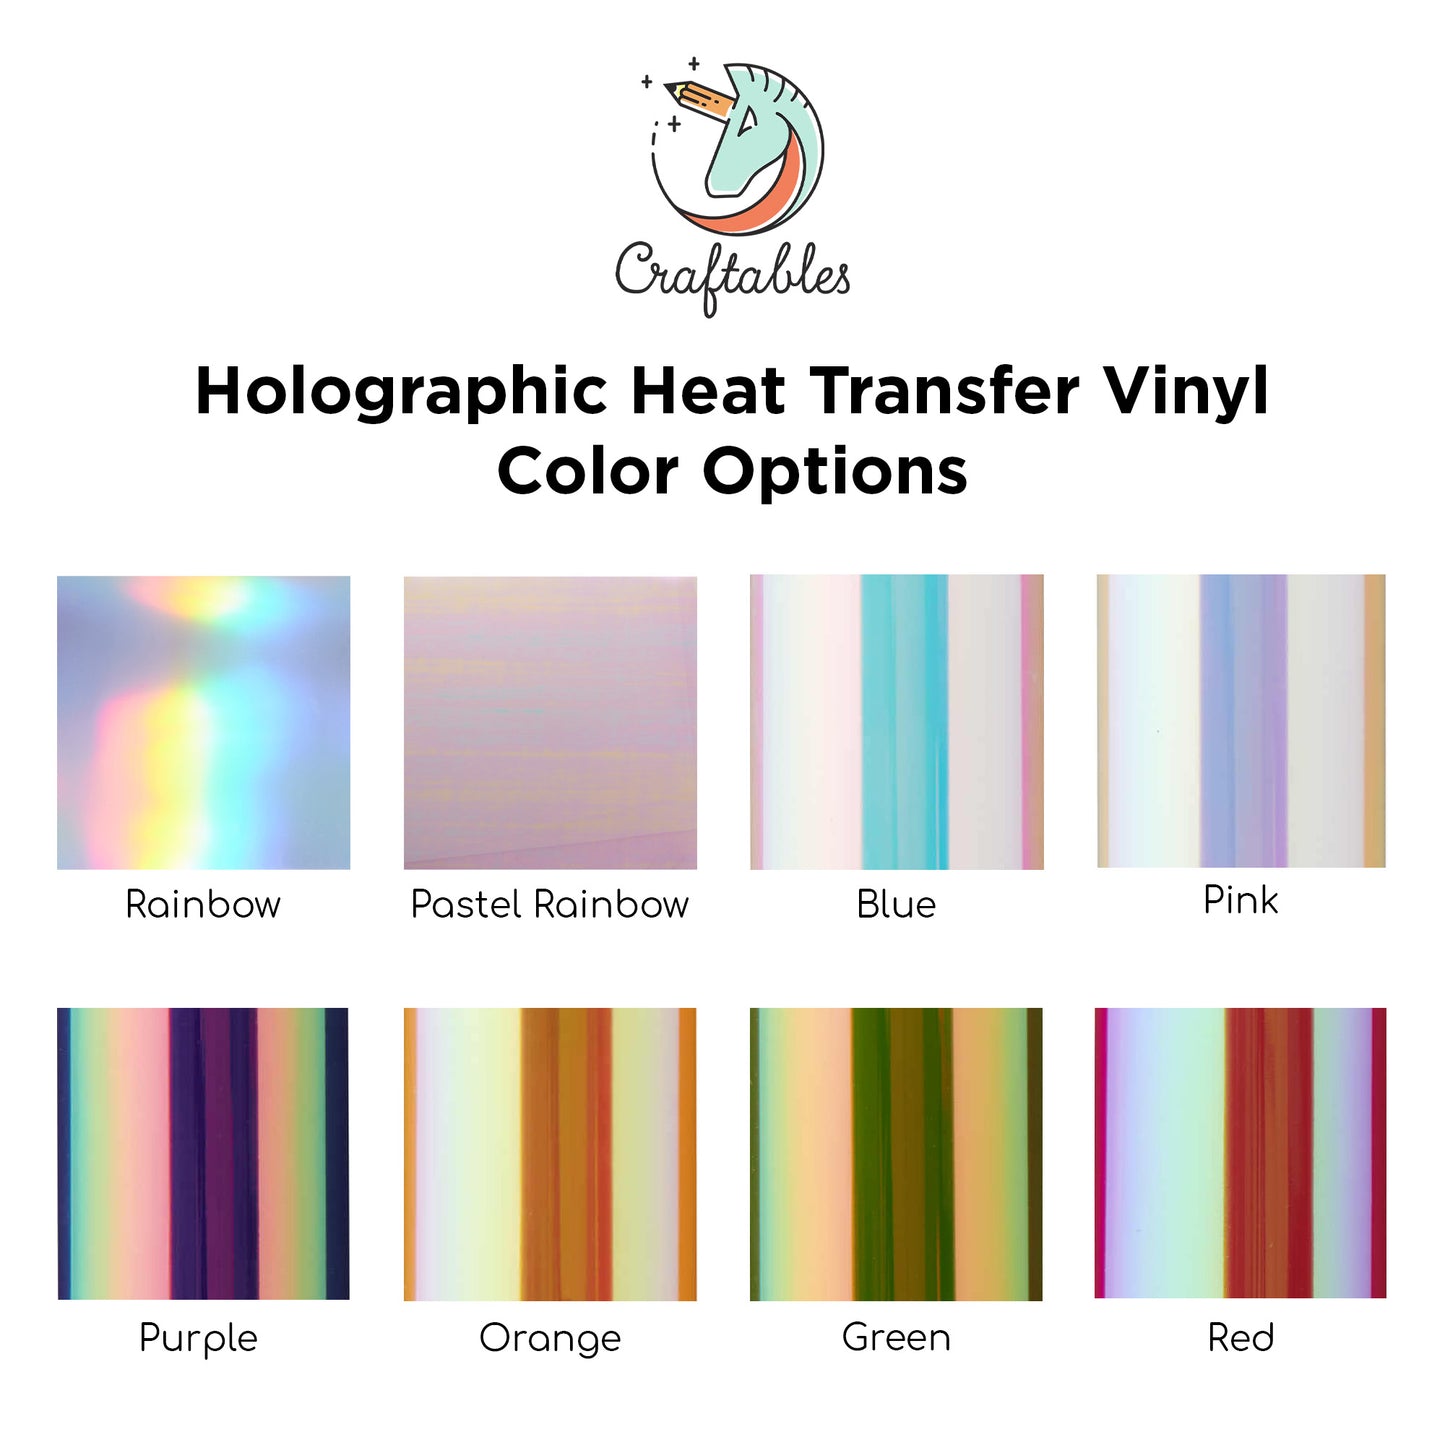 Pink Holographic Heat Transfer Vinyl Rolls By Craftables